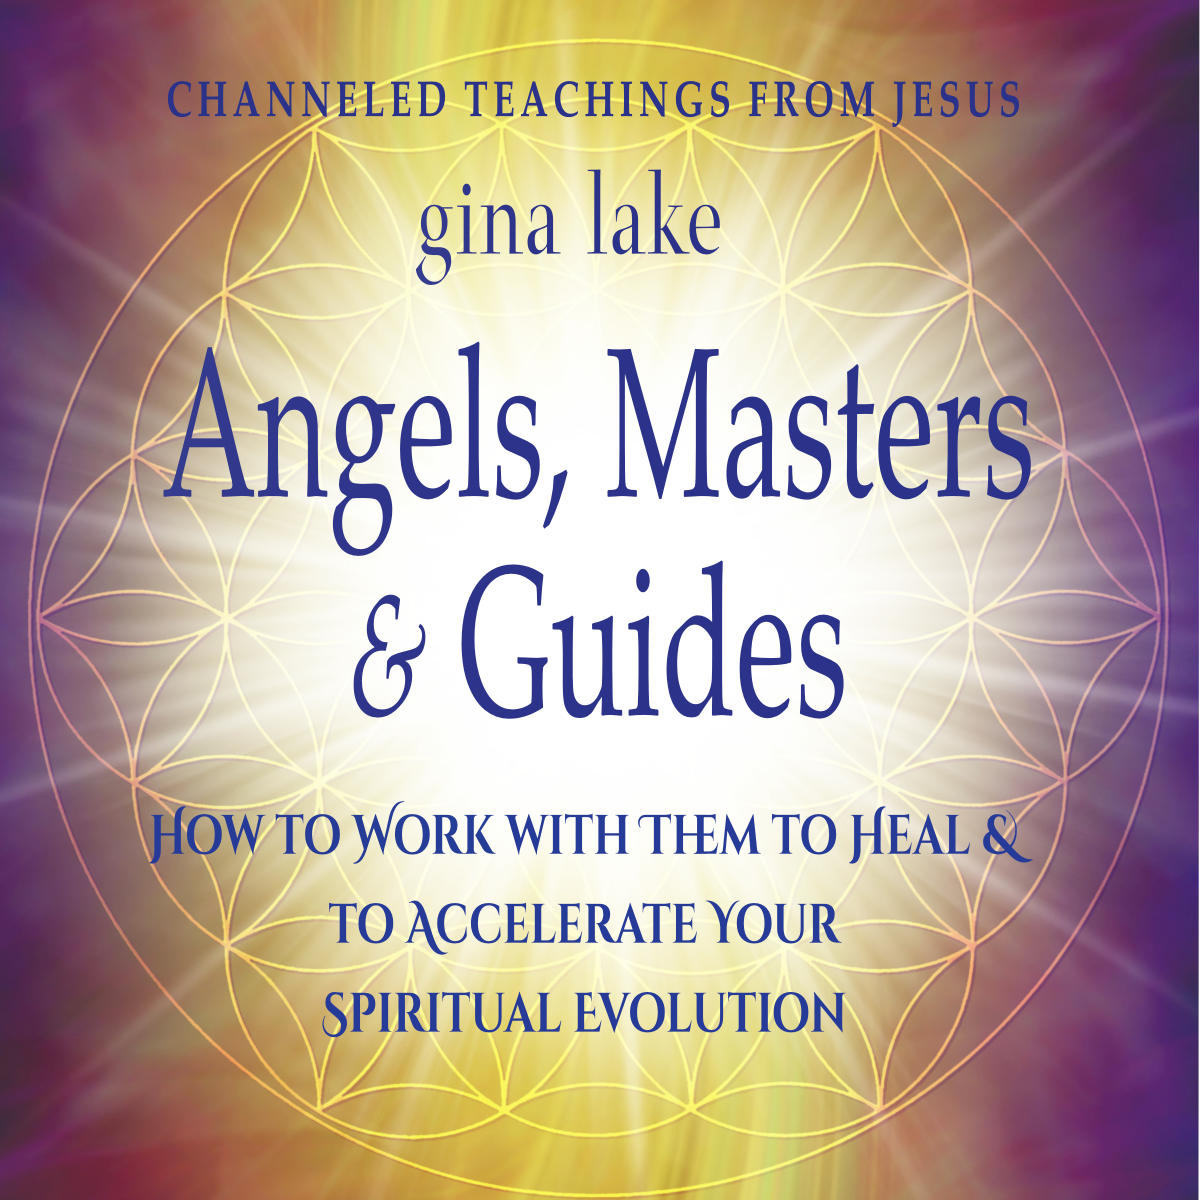 Angels, Masters, and Guides by Gina Lake